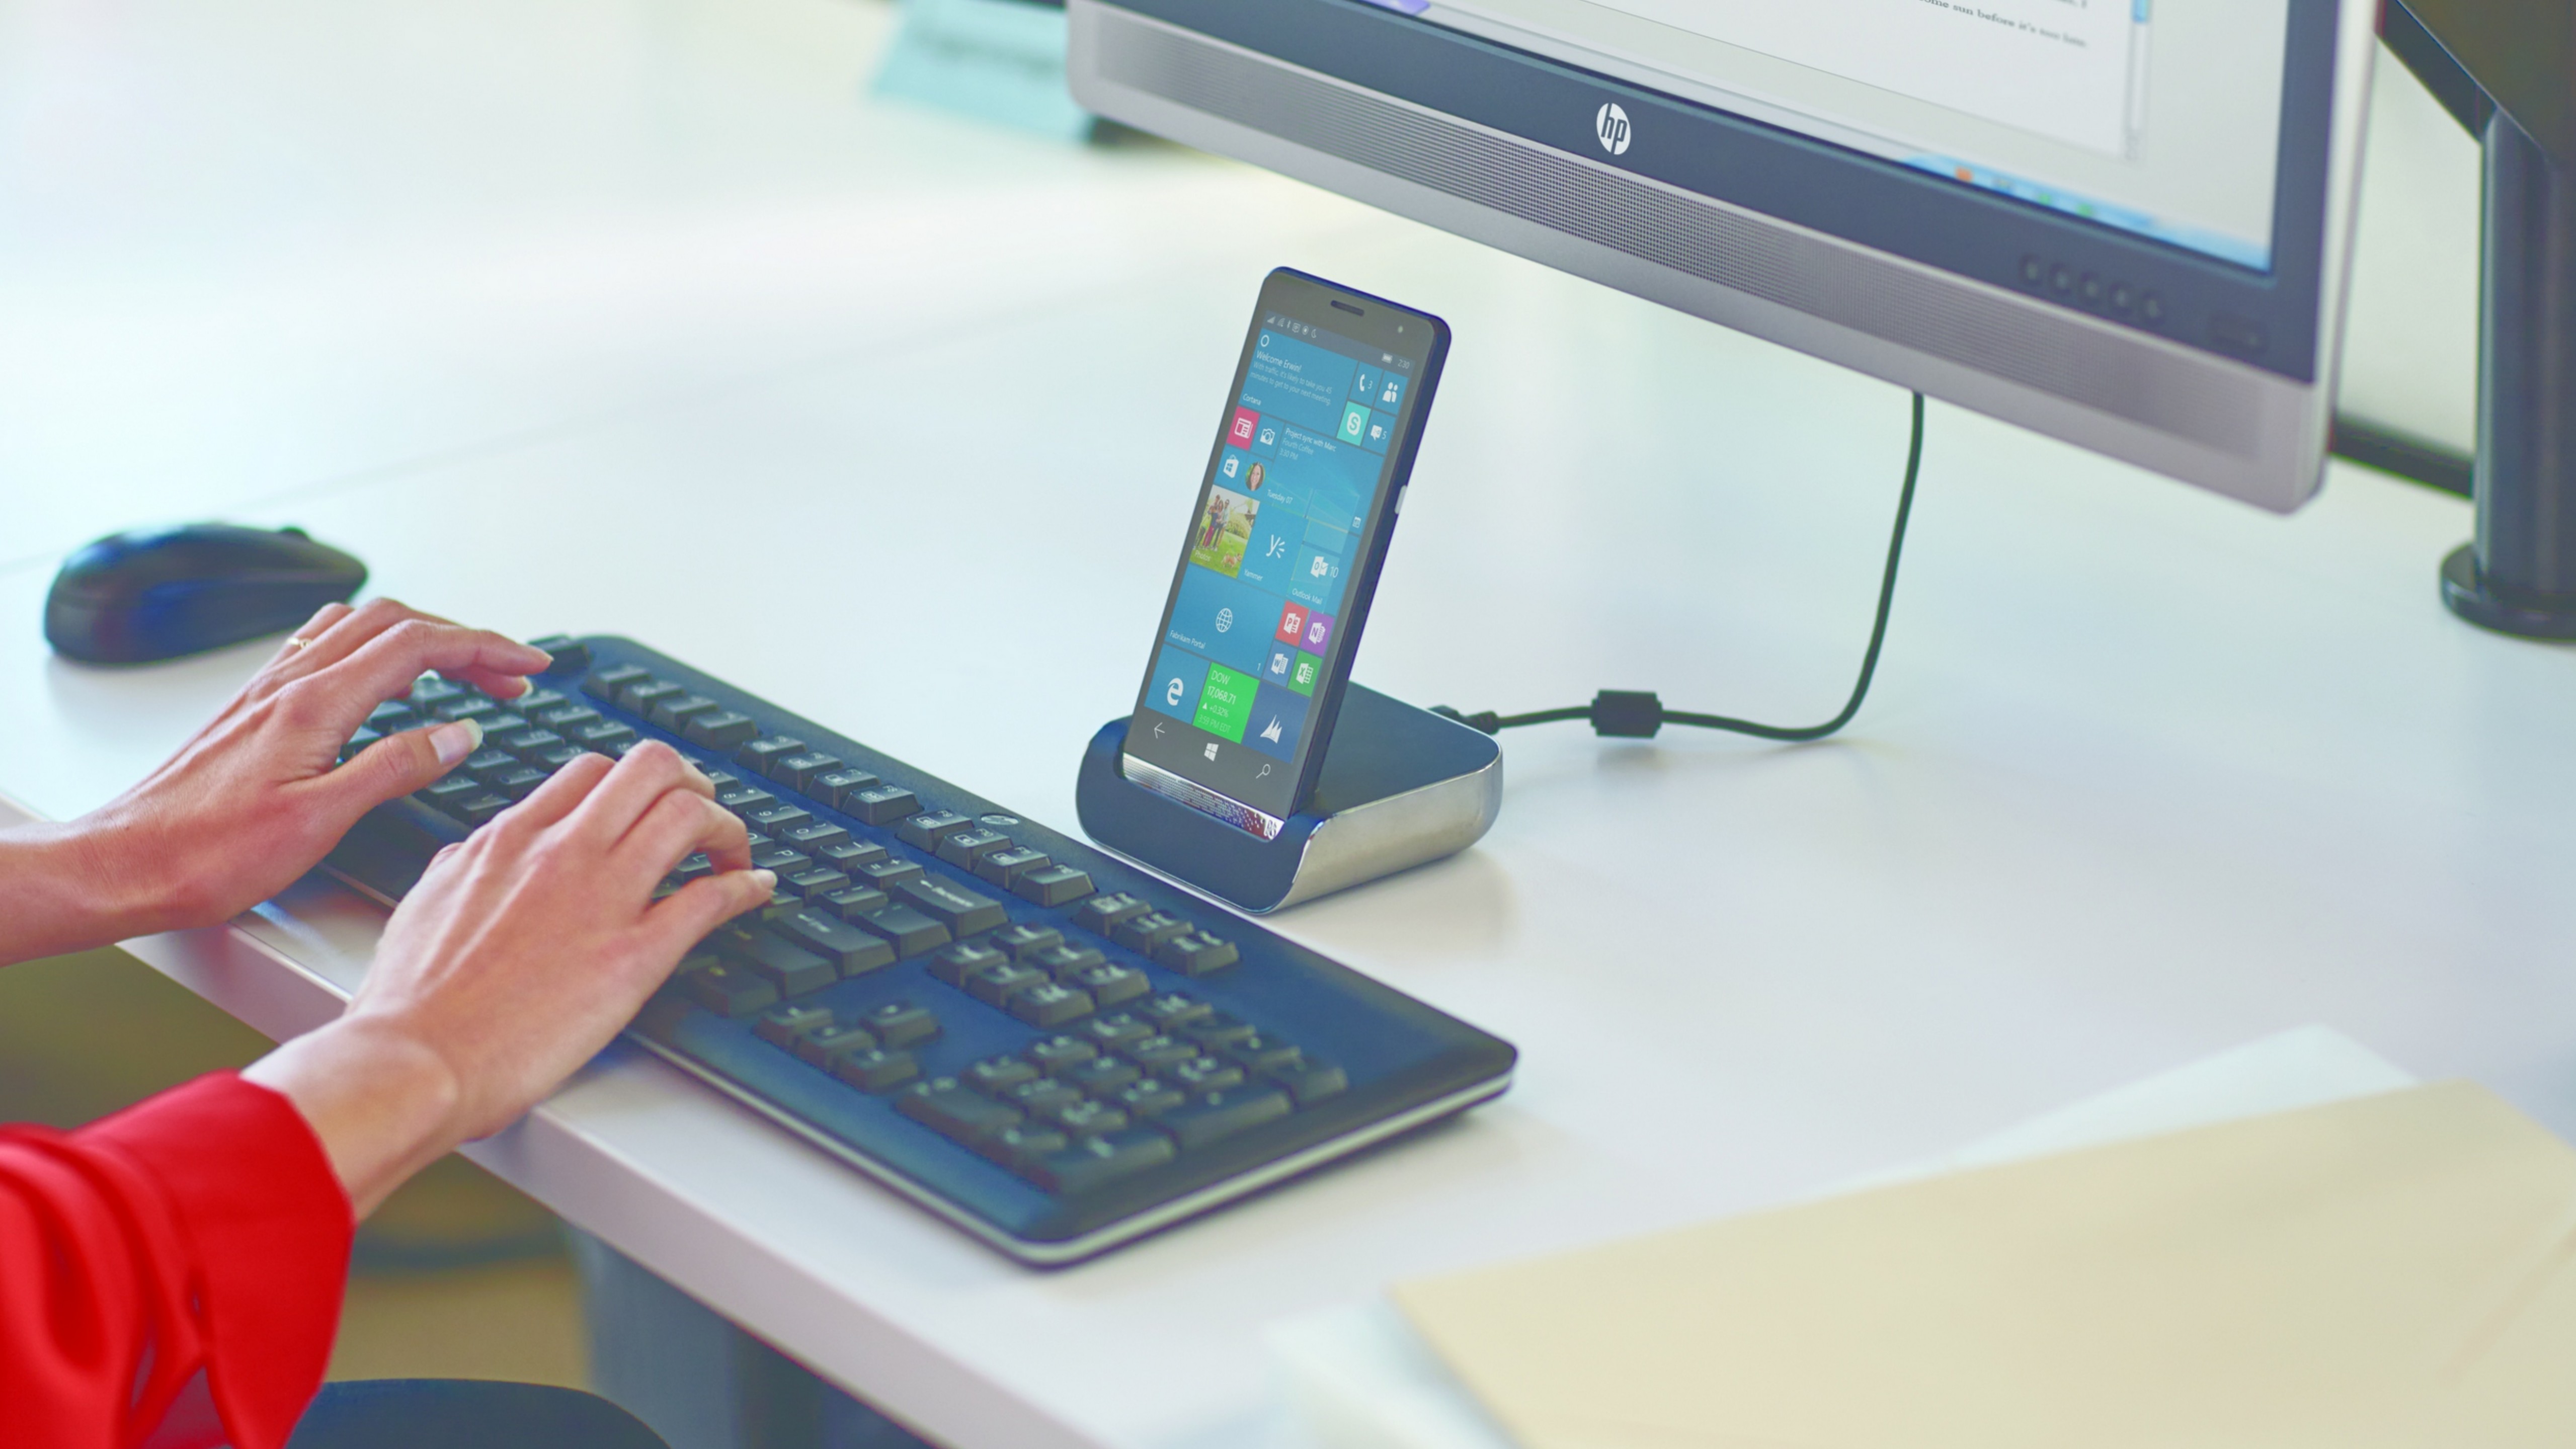 The HP Elite x3 with Windows 10 - Redefining the Mobile Computing 